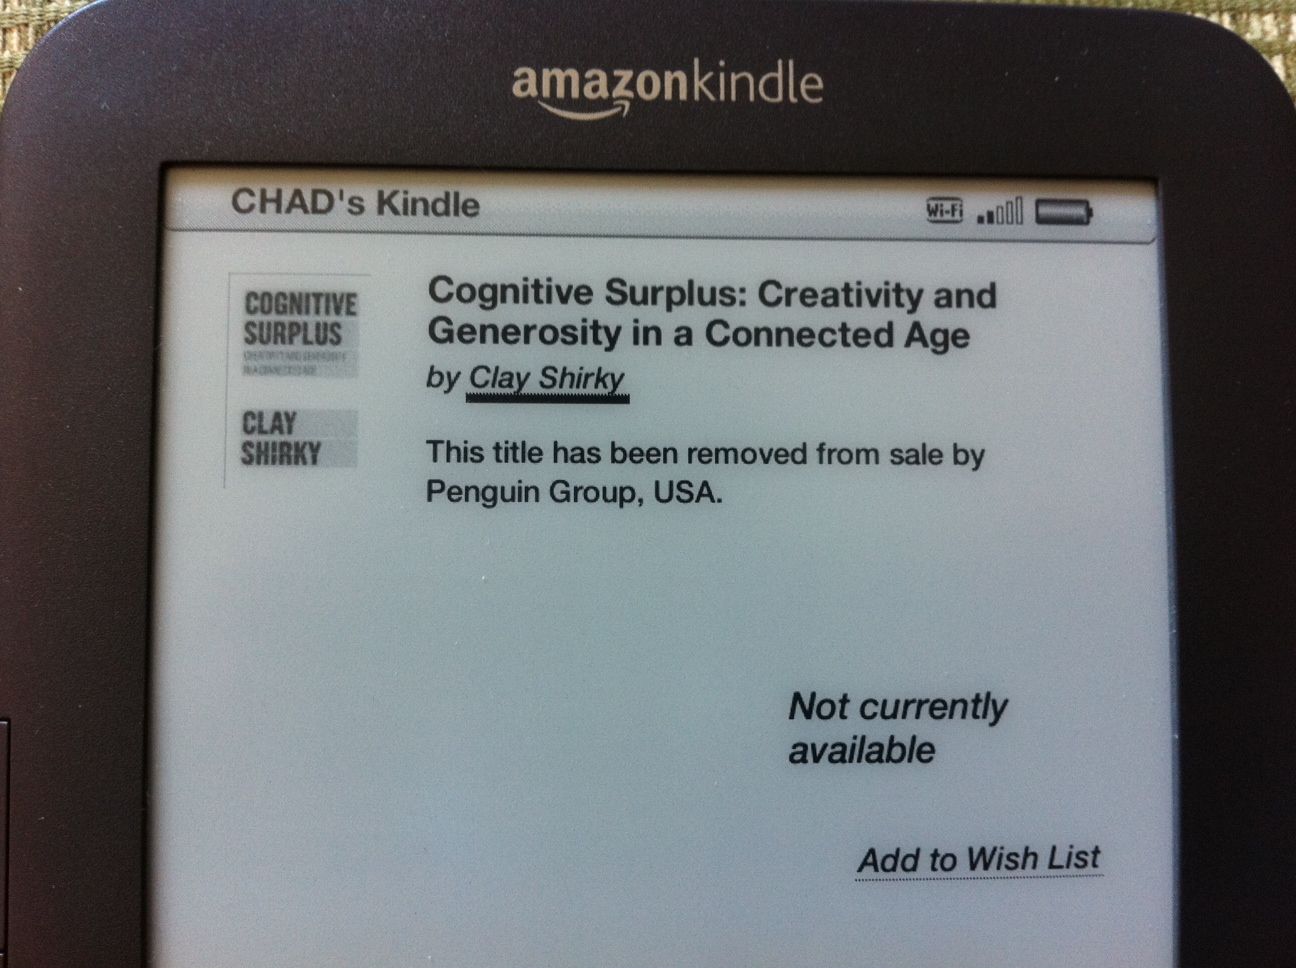 Amazon Kindle ebook not available